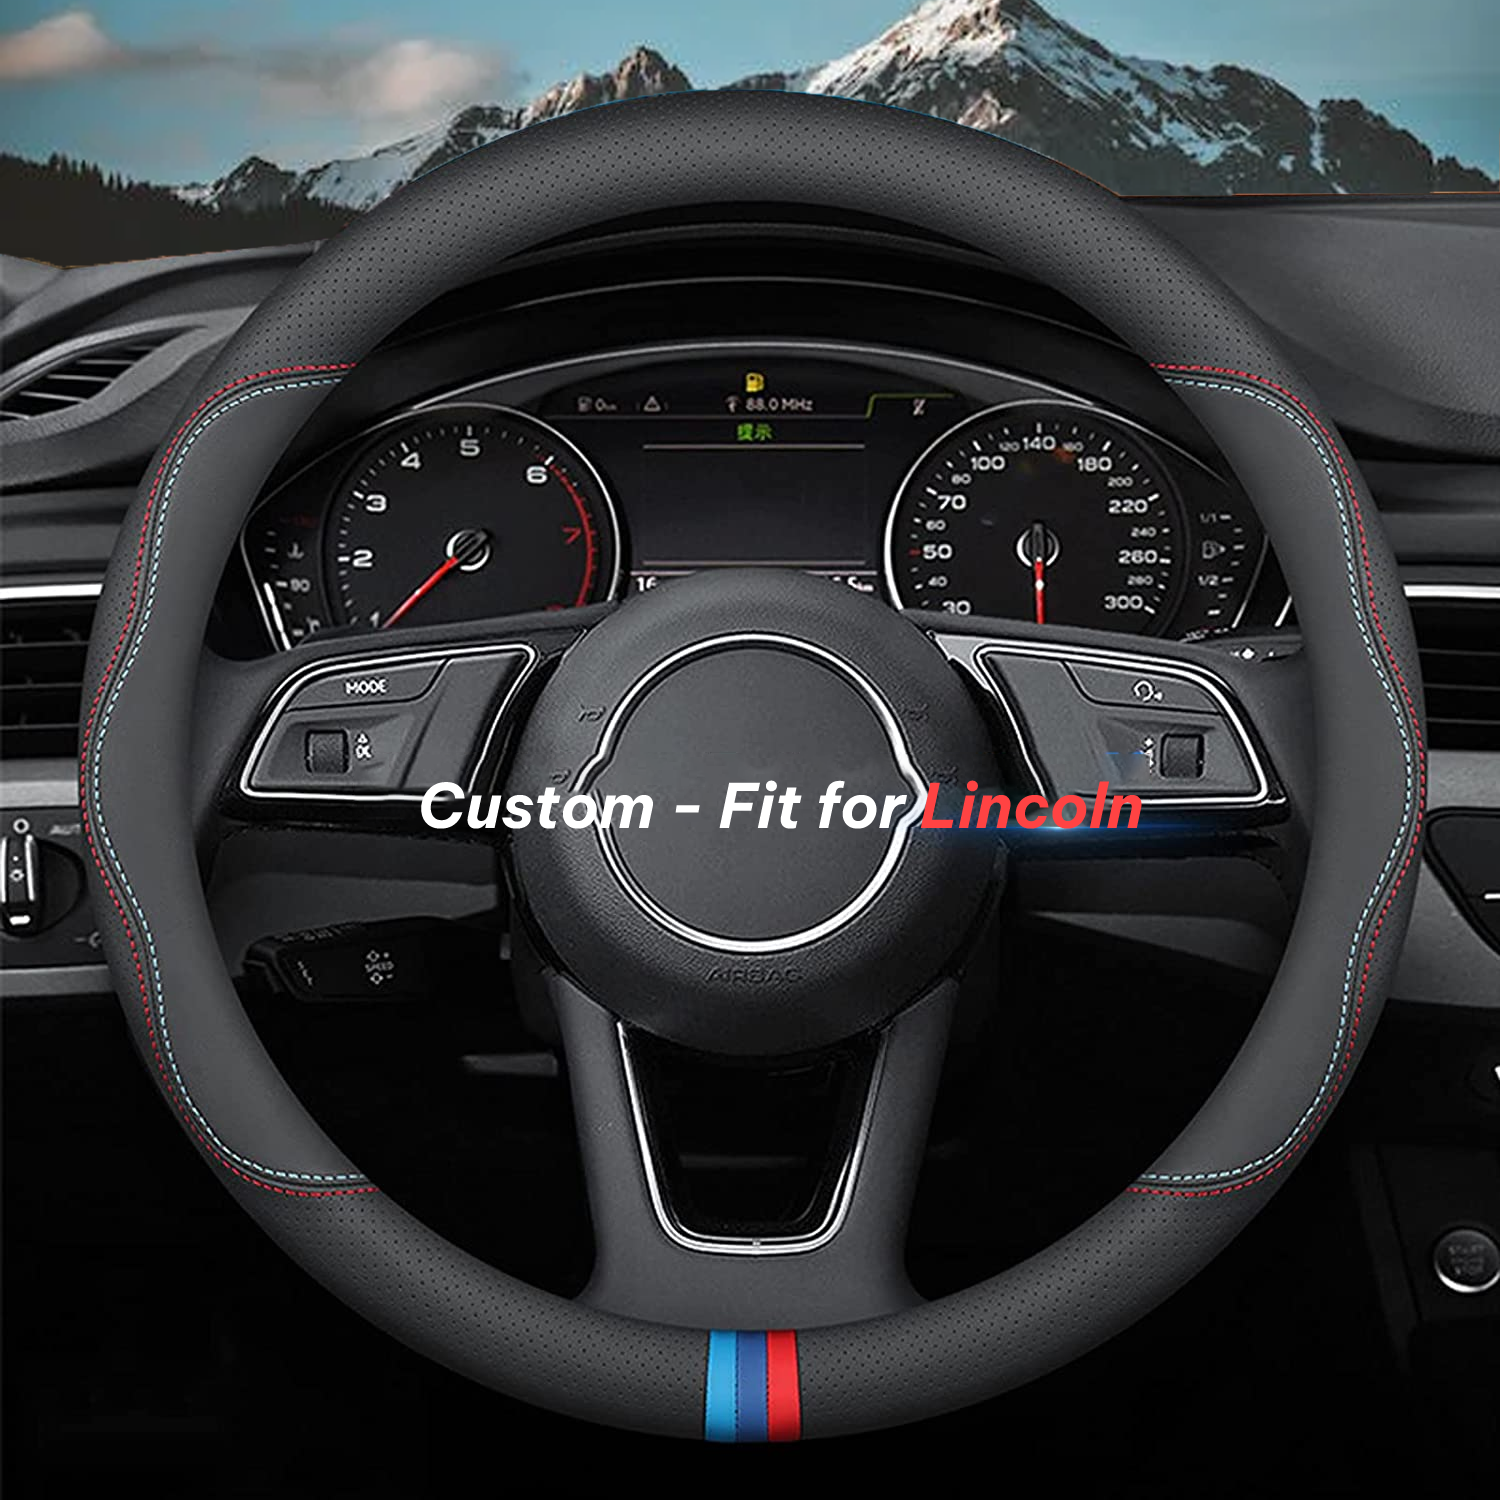 Car Steering Wheel Cover 2024 Update Version, Custom-Fit for Car, Premium Leather Car Steering Wheel Cover with Logo, Car Accessories DLLI222